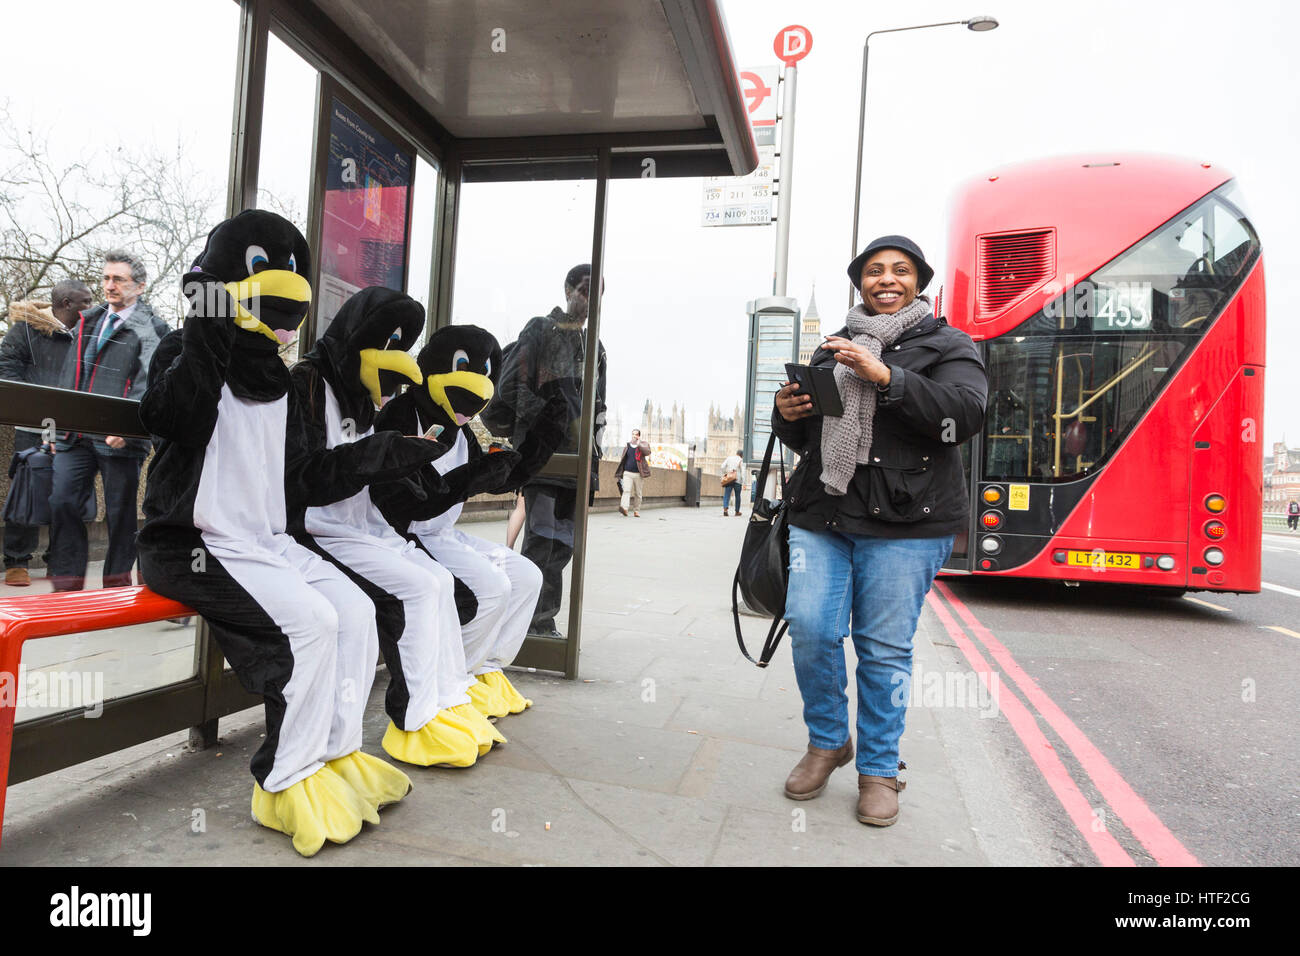 London, UK. 10 March 2017. As part of the British Science Association's (BSA) Science Week from 10 to 19 March 2017, a host of penguin pals will be appearing in London. The BSA want to get a quarter of a million penguins spotted during the week, basically labelling penguins in a series of pictures taken on the ground in Antarctica. Penguin Watch is one example of citizen science project, a growing trend for people outside the scientific profession to help take part in experiments from nature and wildlife to astronomy. Stock Photo